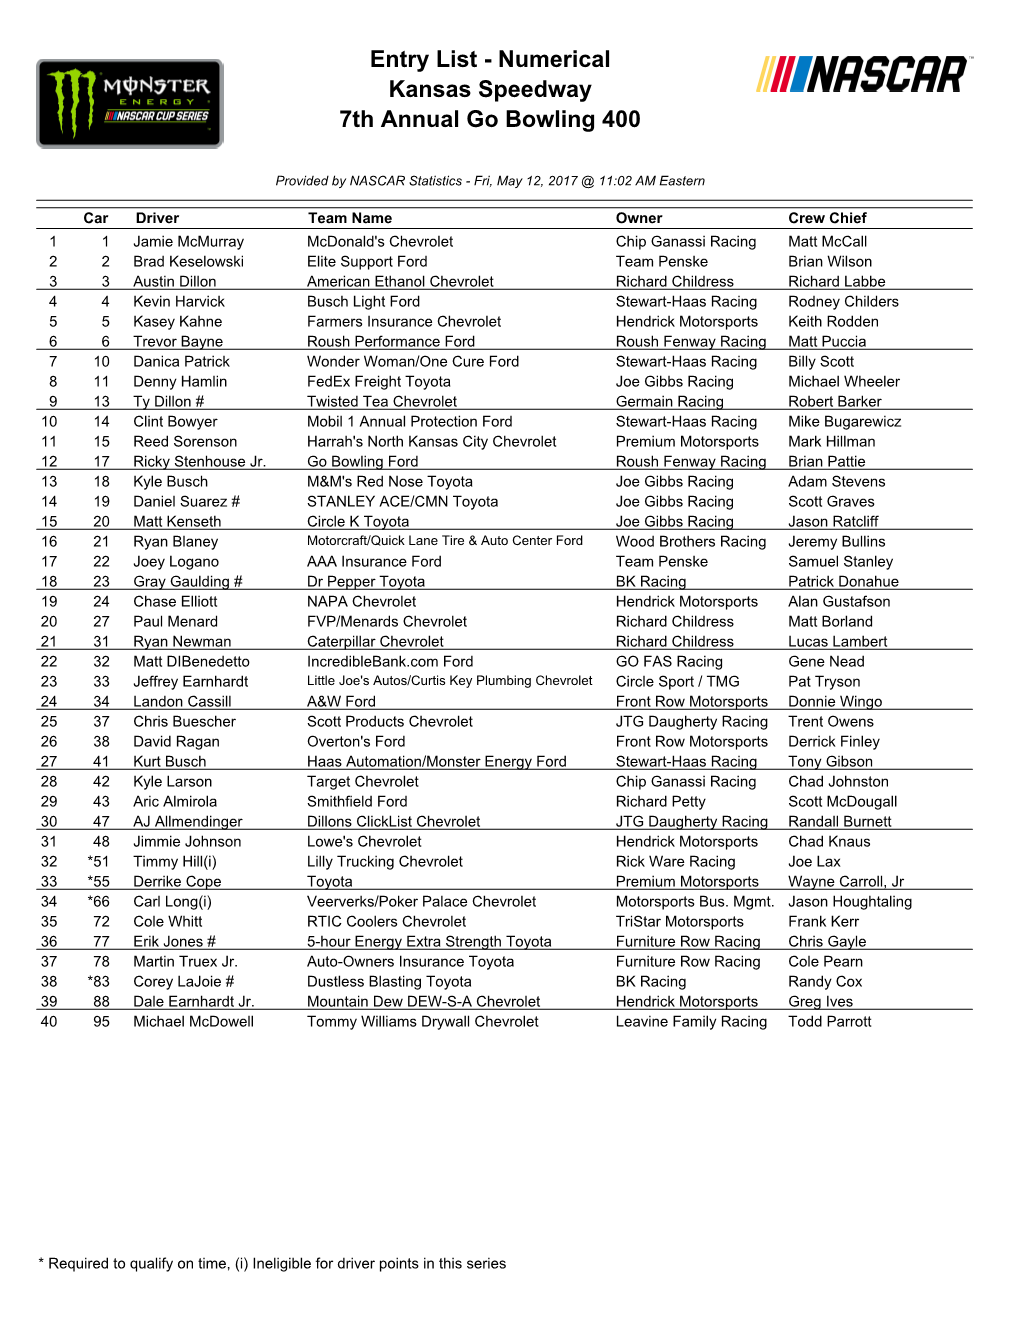 Entry List - Numerical Kansas Speedway 7Th Annual Go Bowling 400